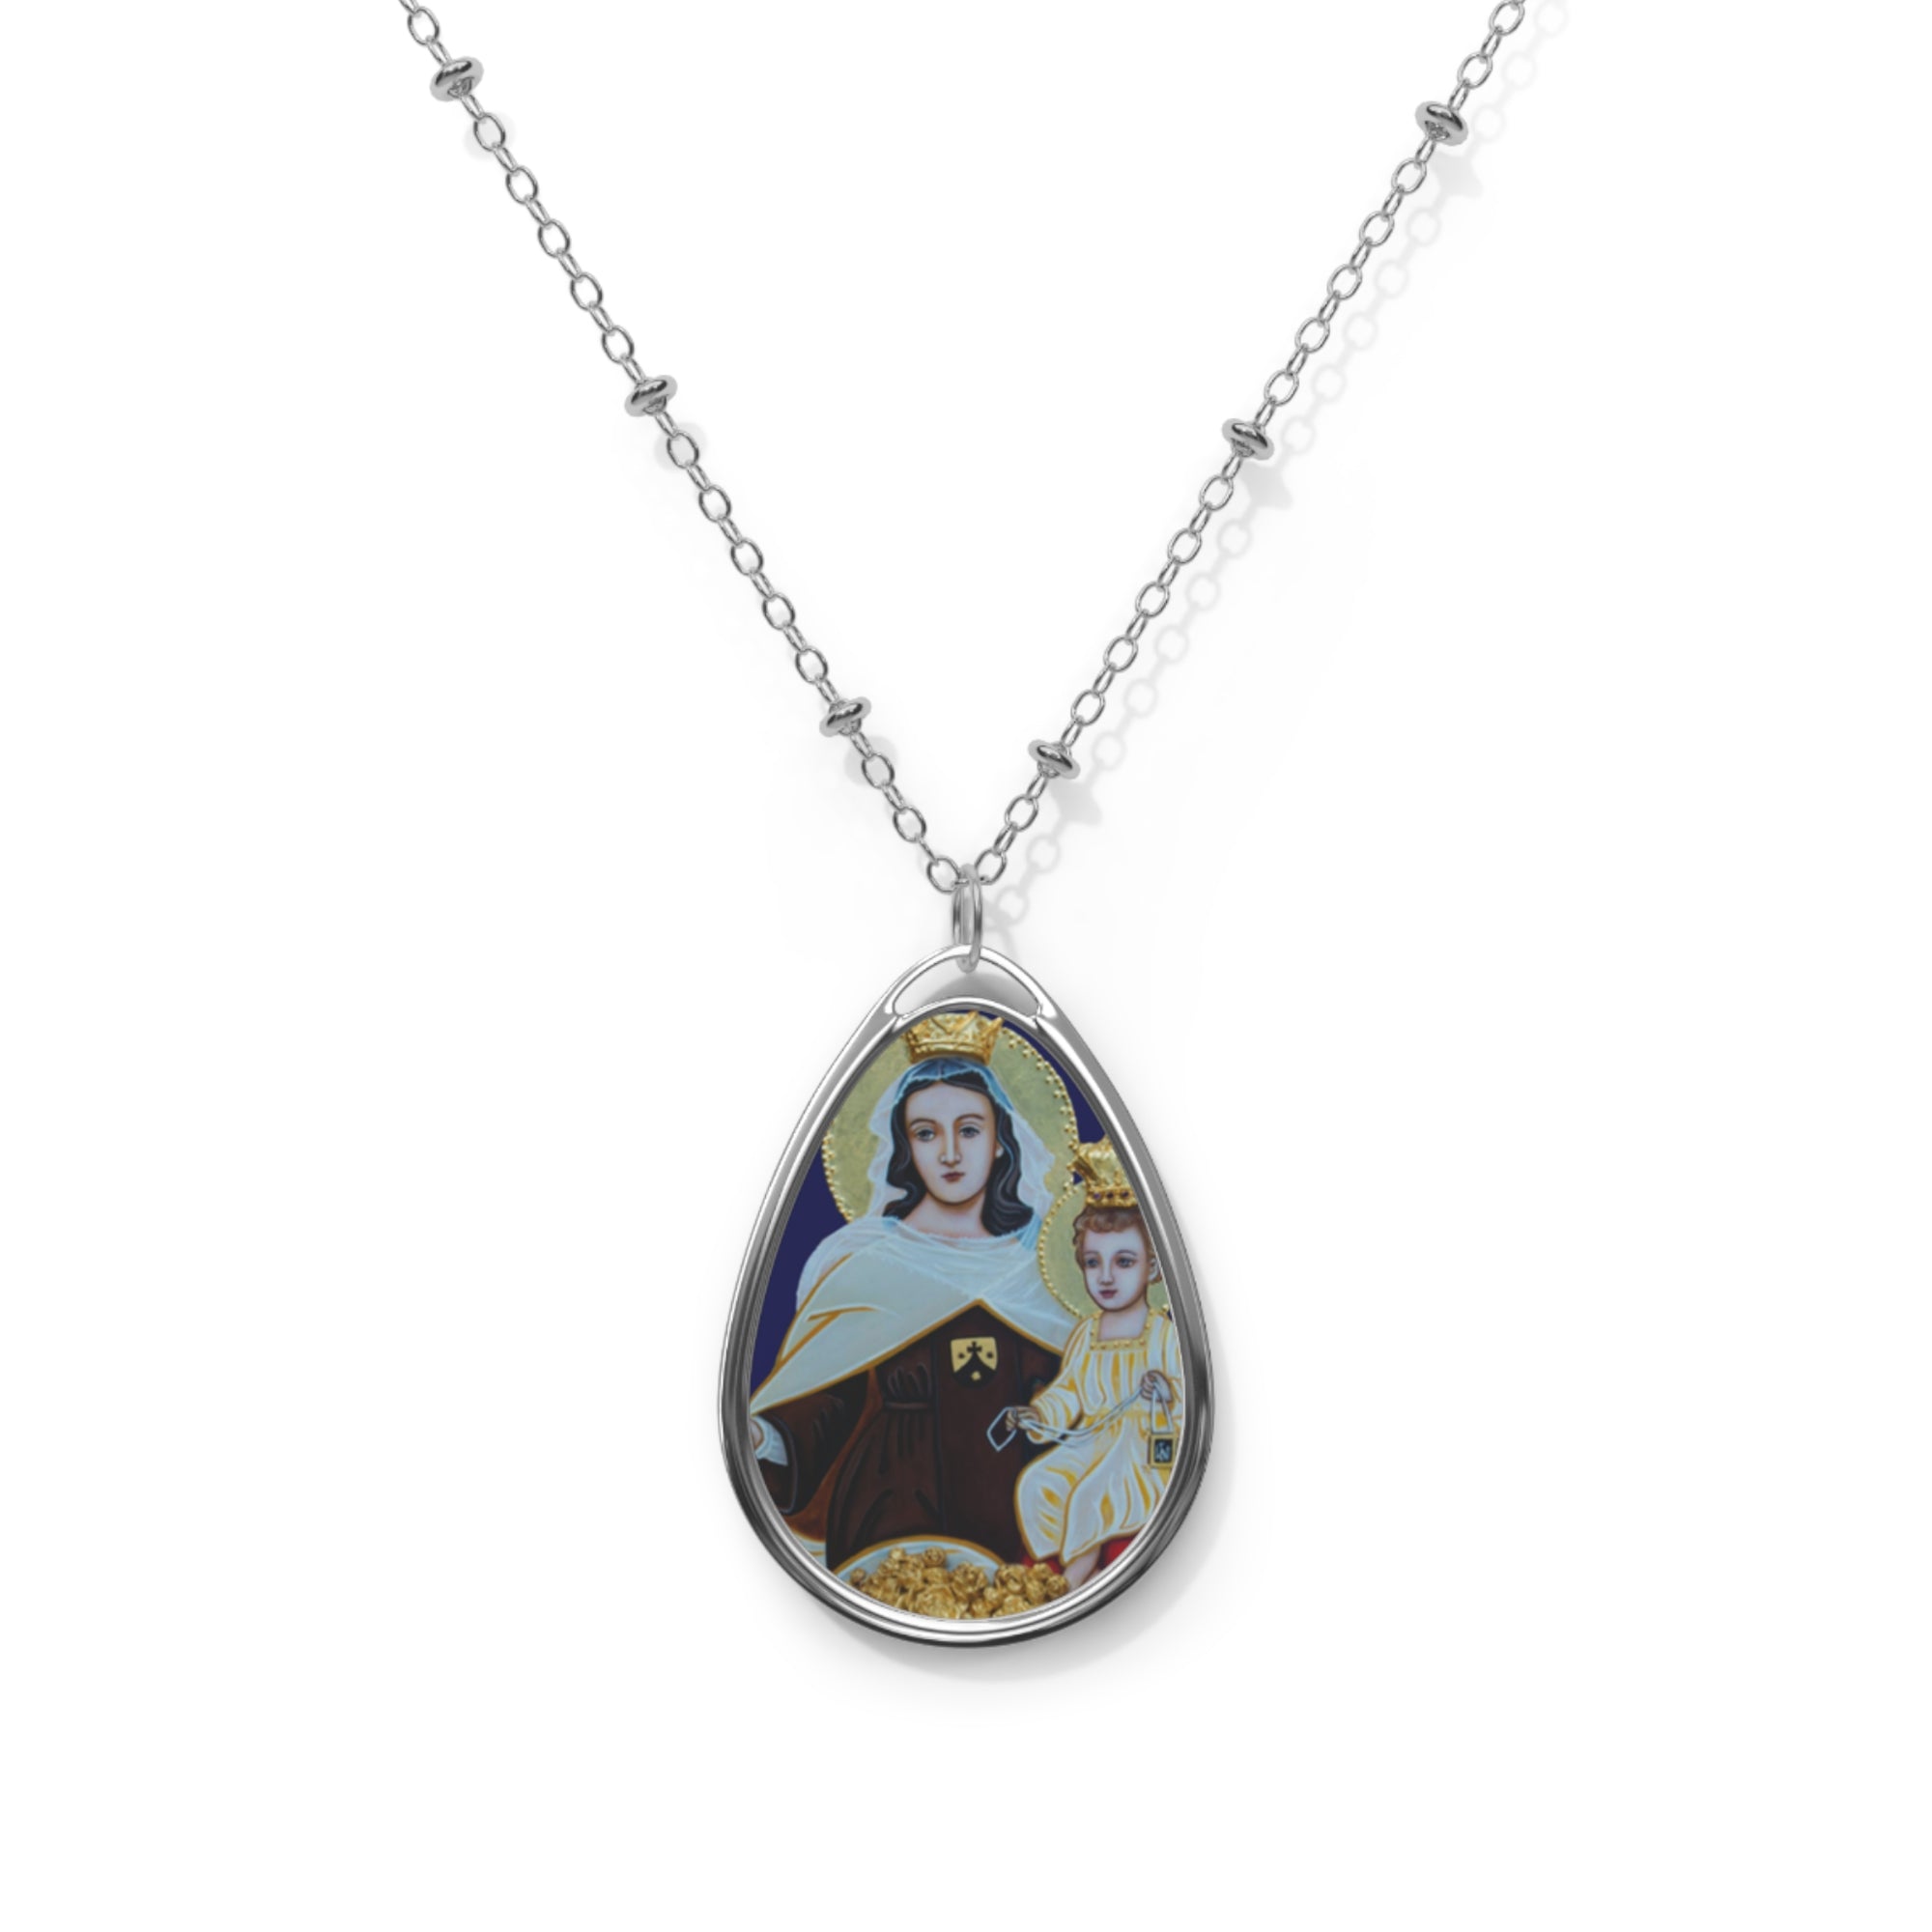 Our Lady of Mount Carmel Necklace